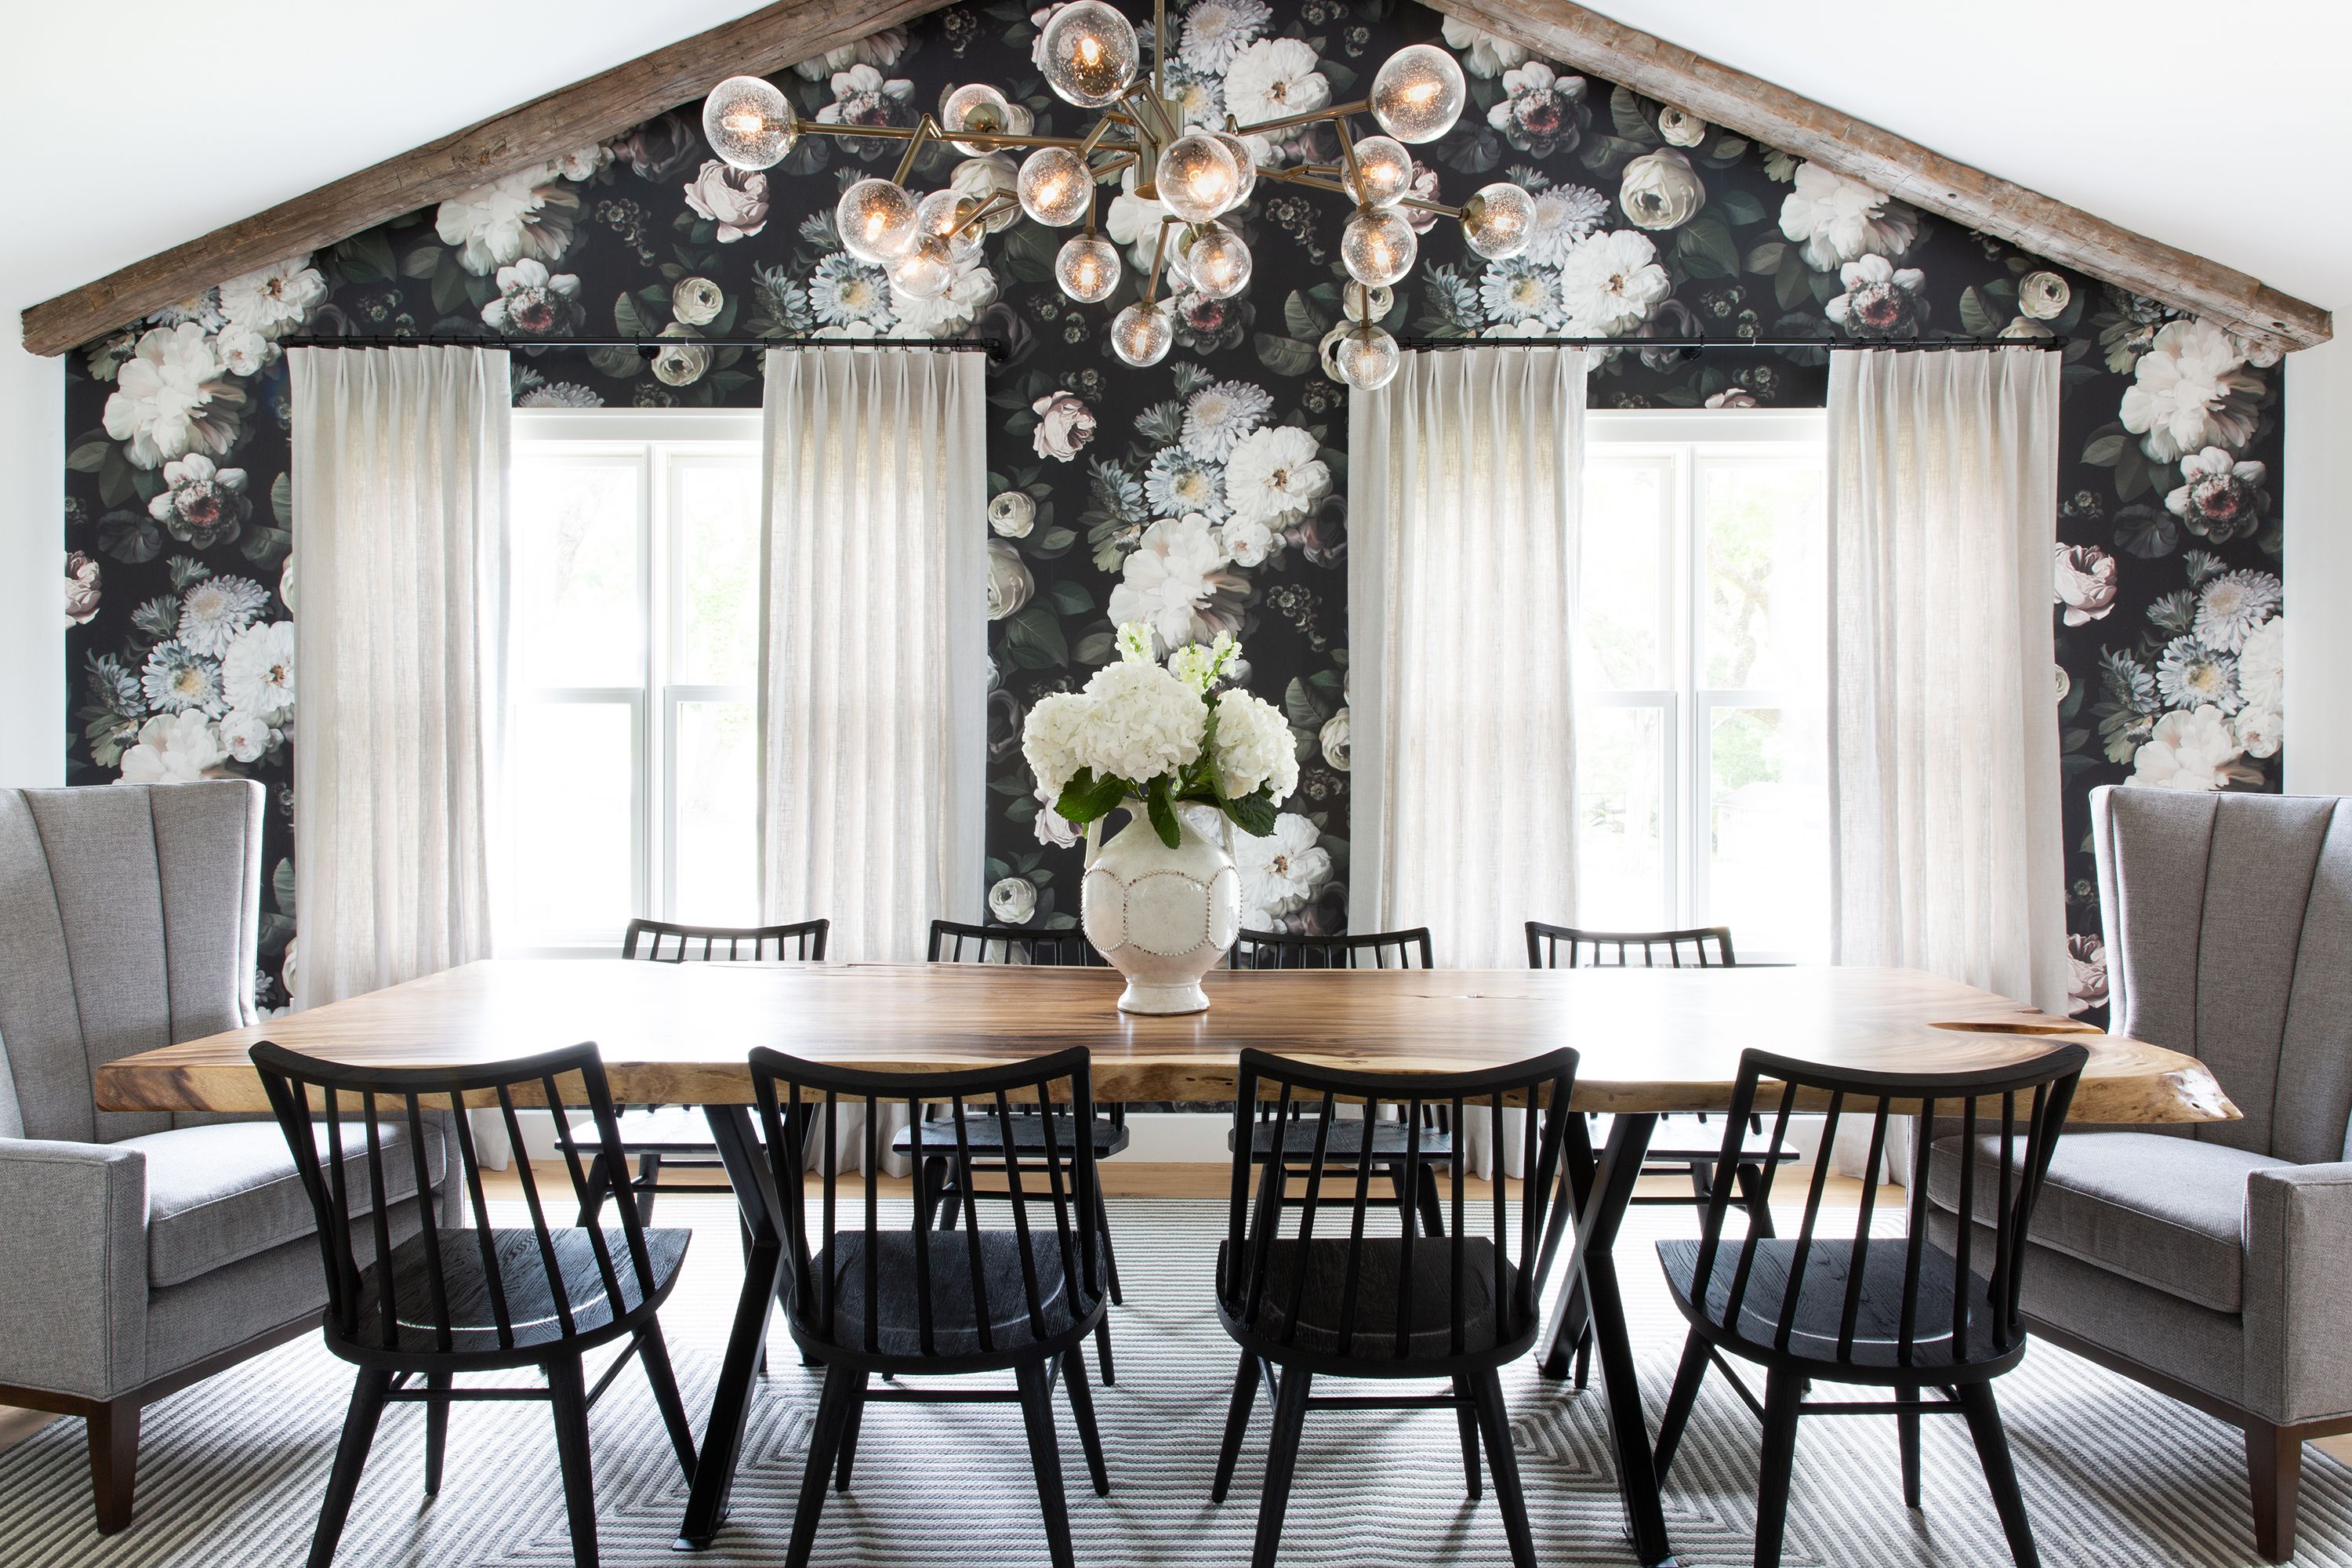 Dining Room Wallpaper Ideas Youll Love  DesignCafe